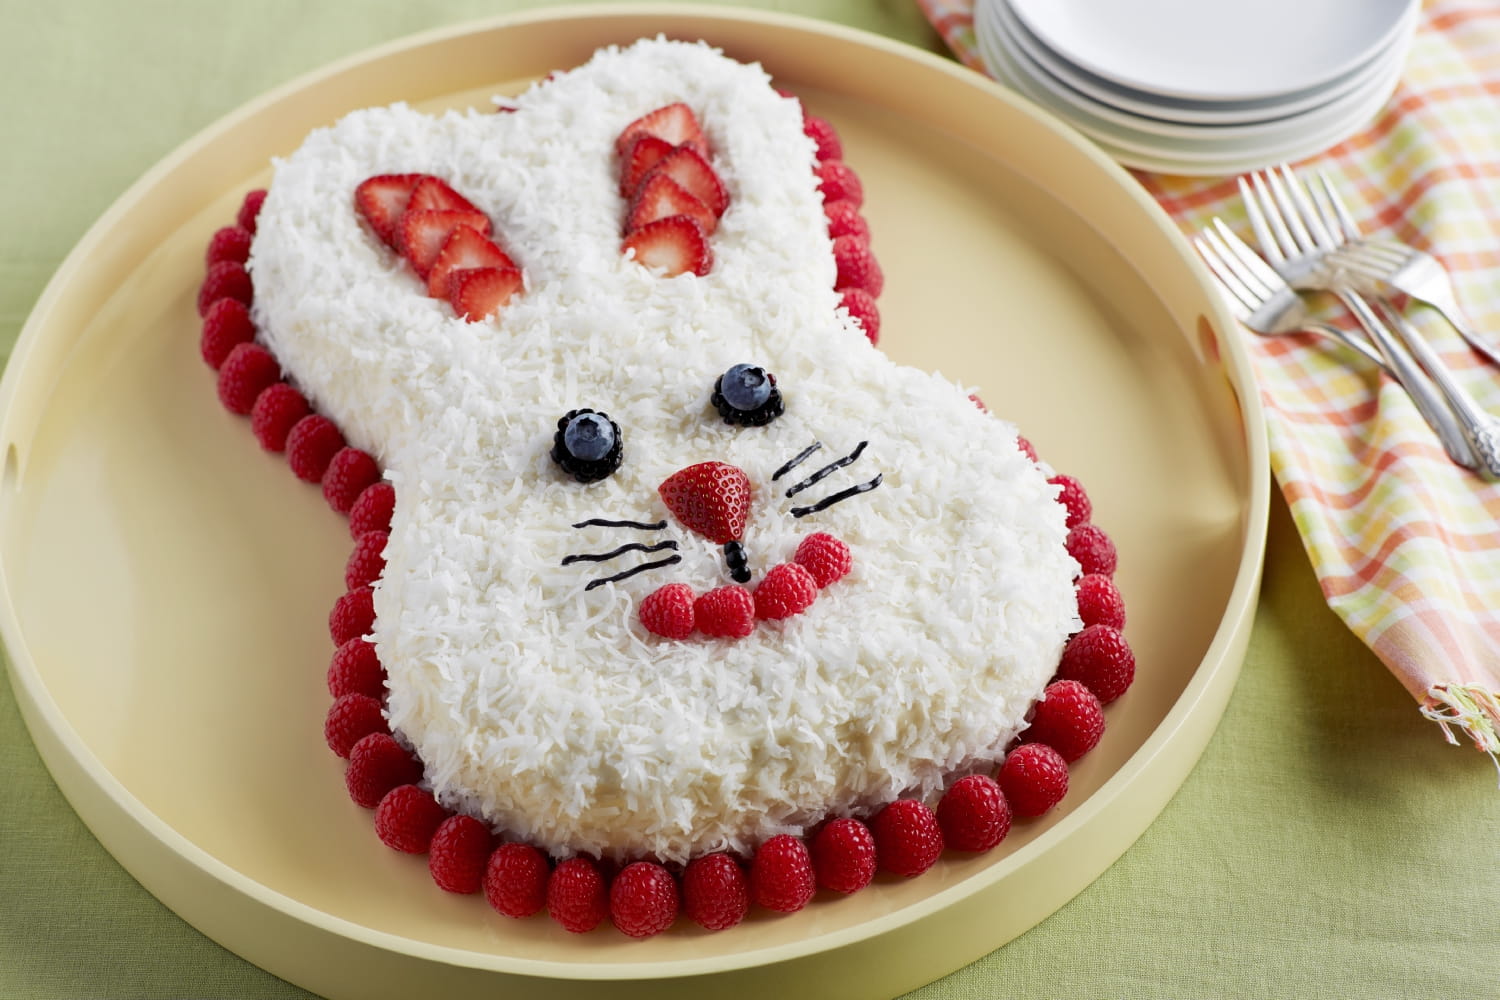 Behind The Scenes: Making a Bunny Cake